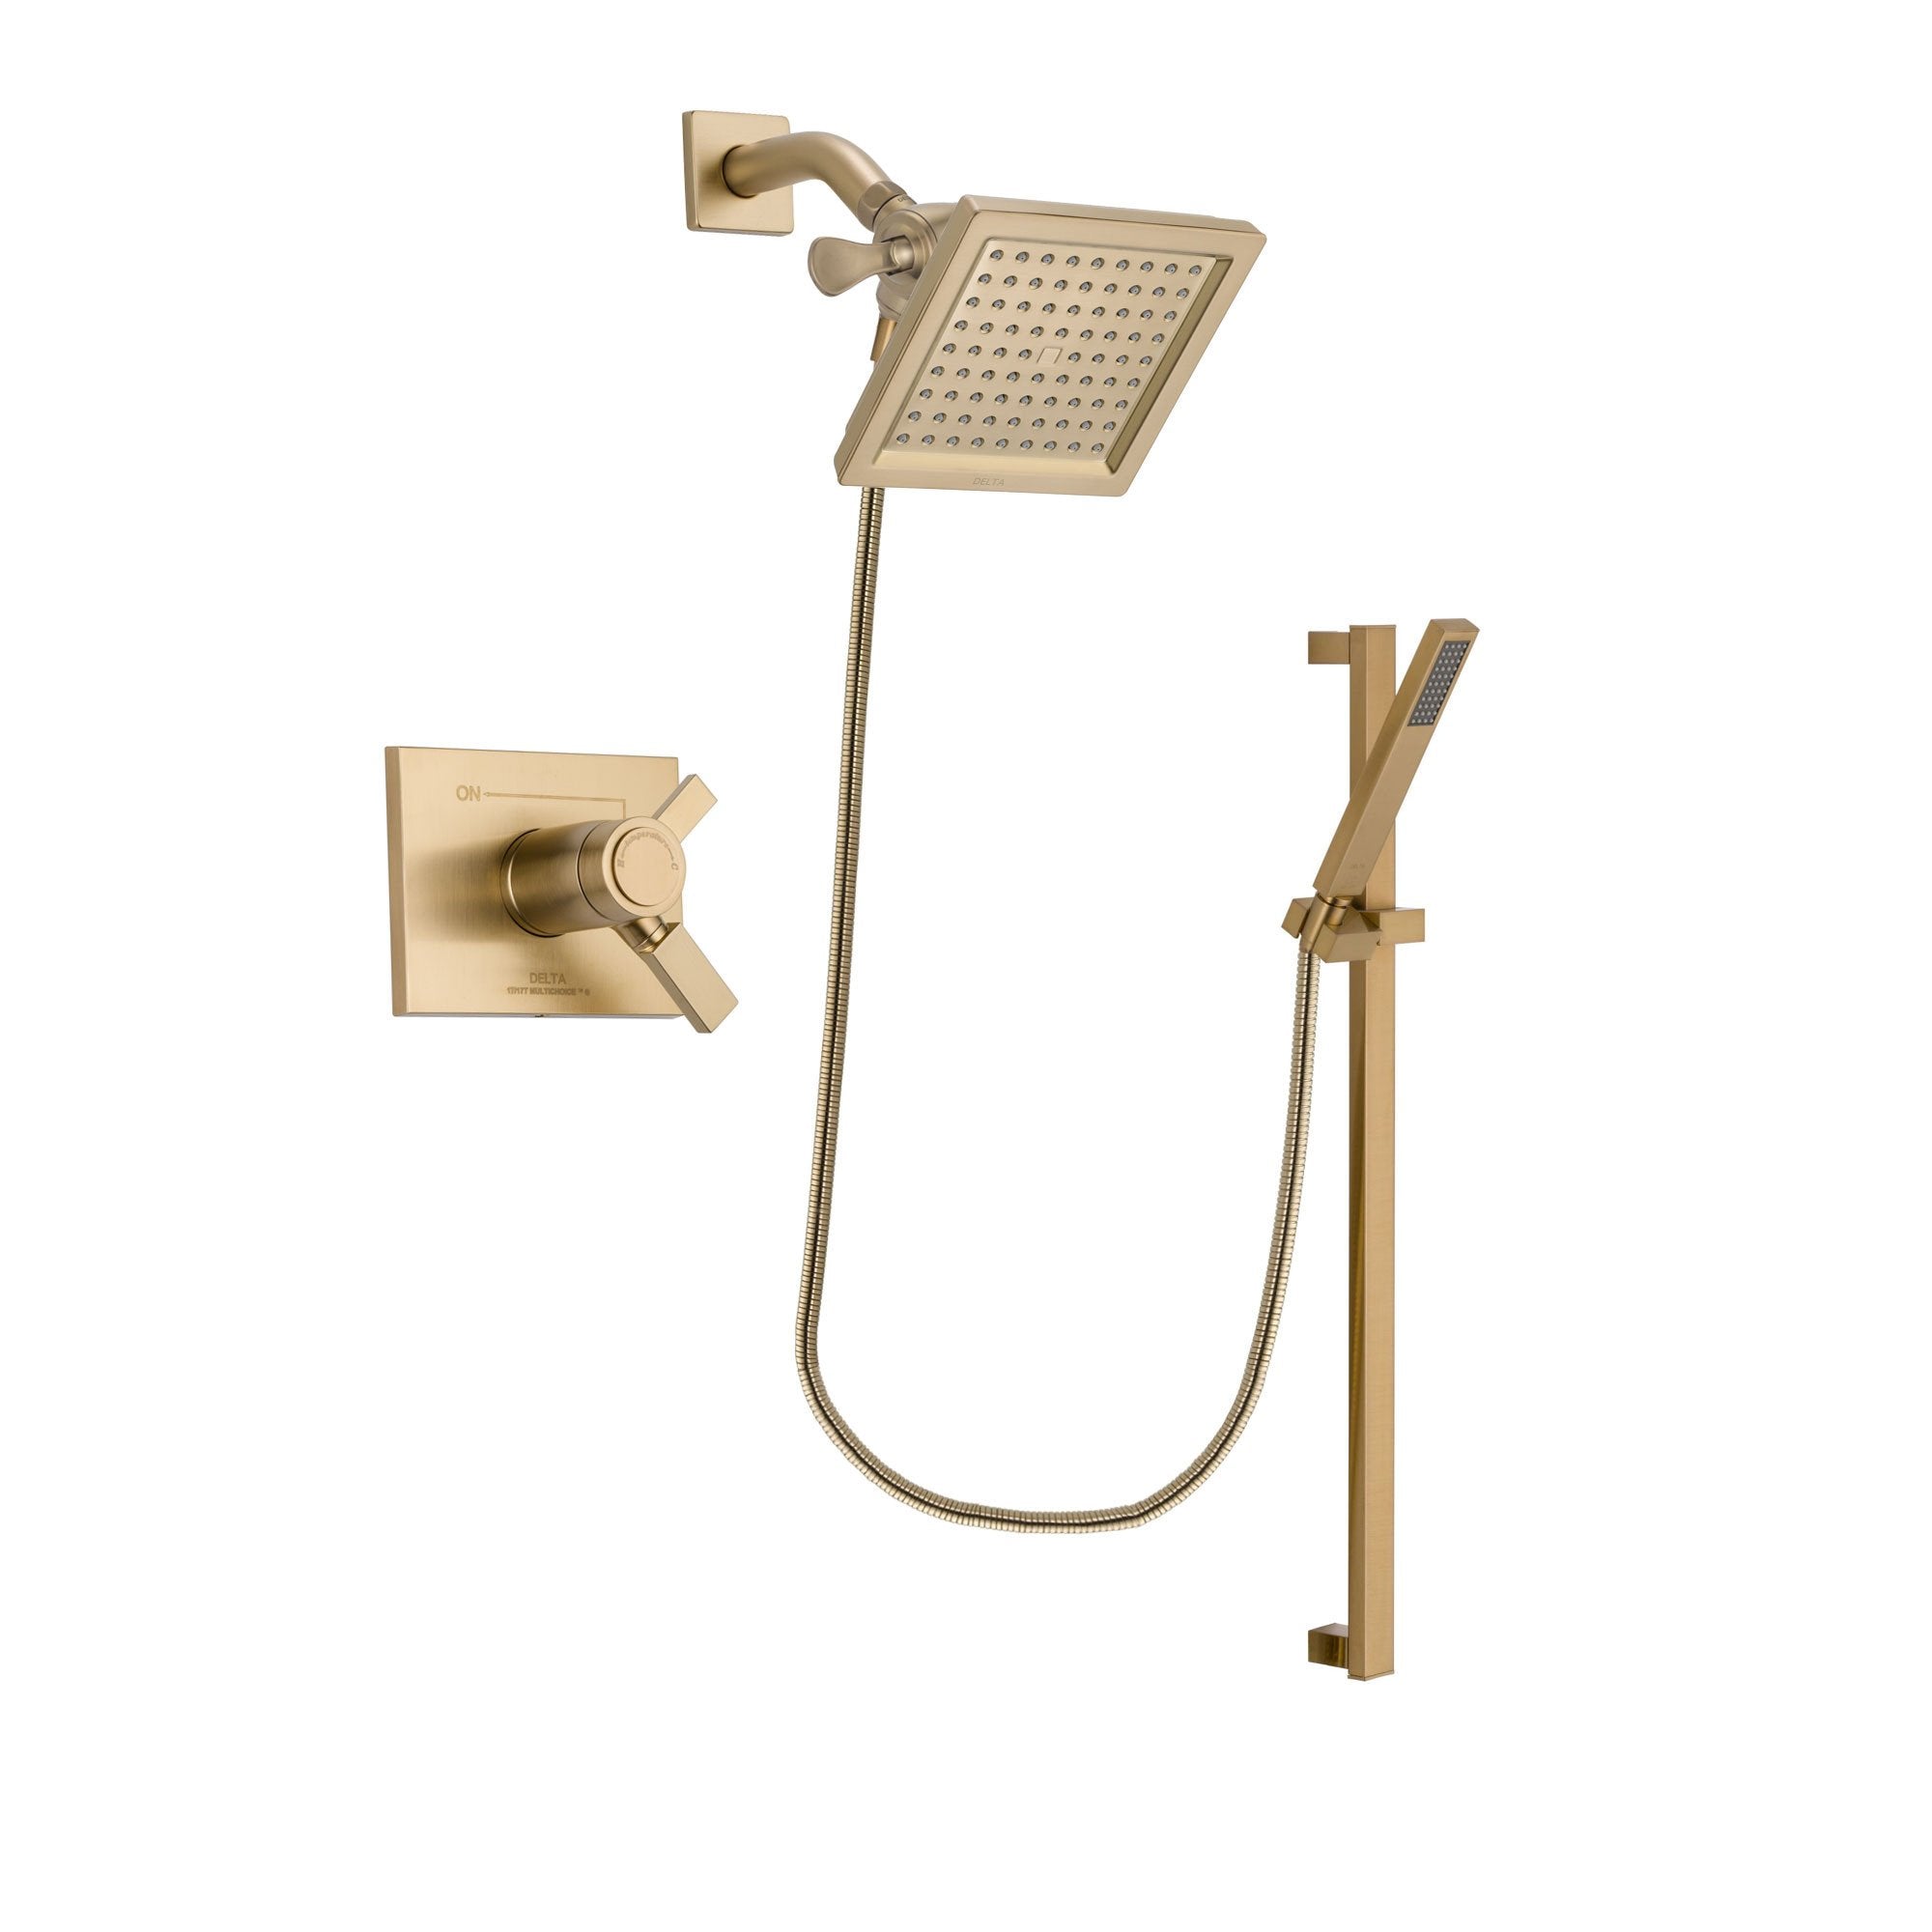 Delta Vero Champagne Bronze Finish Thermostatic Shower Faucet System Package with 6.5-inch Square Rain Showerhead and Modern Handheld Shower with Square Slide Bar Includes Rough-in Valve DSP3996V